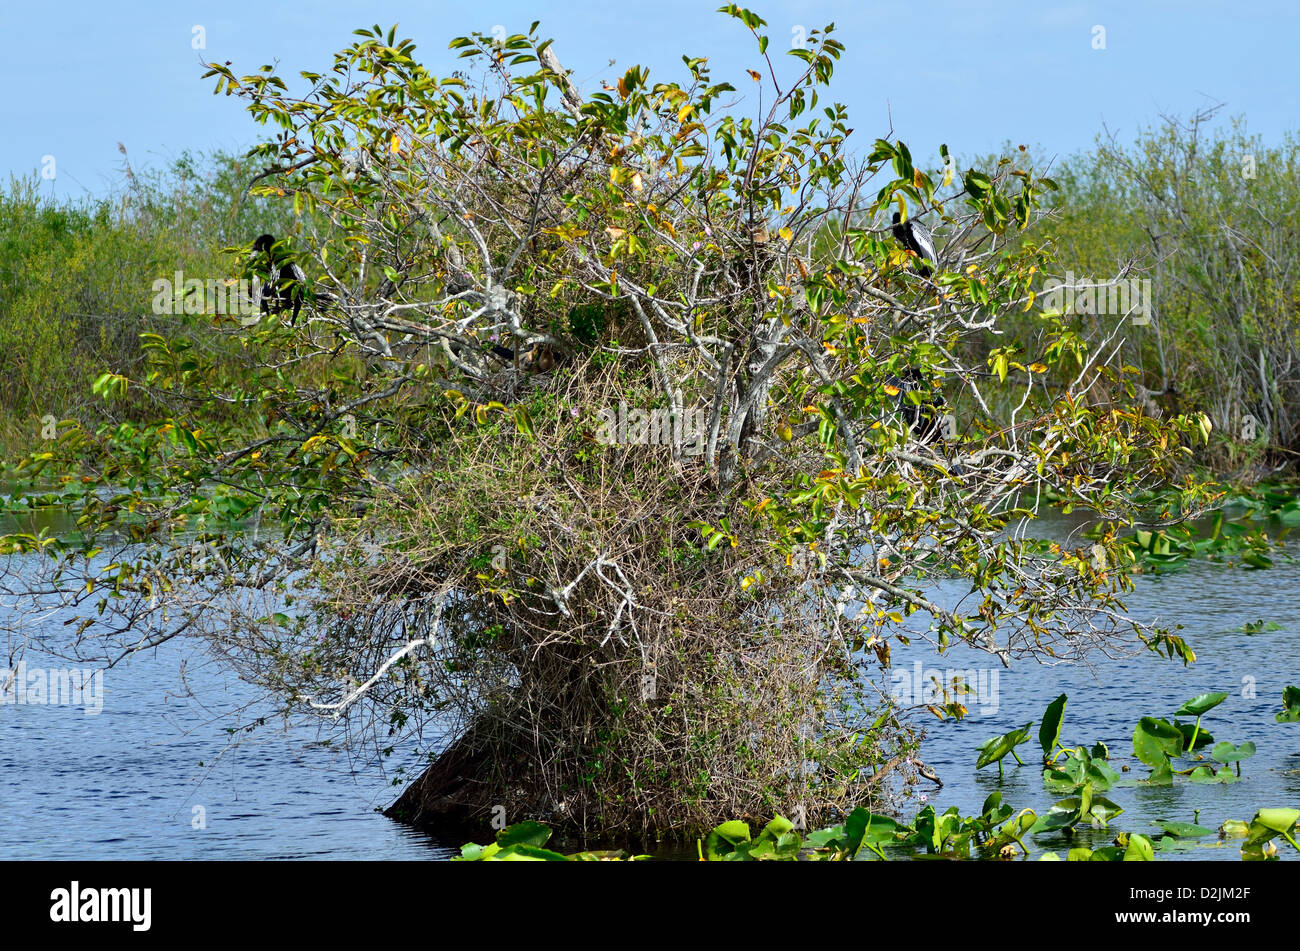 Wild water birds rest on a tree. The Everglades National Park, Florida, USA. Stock Photo